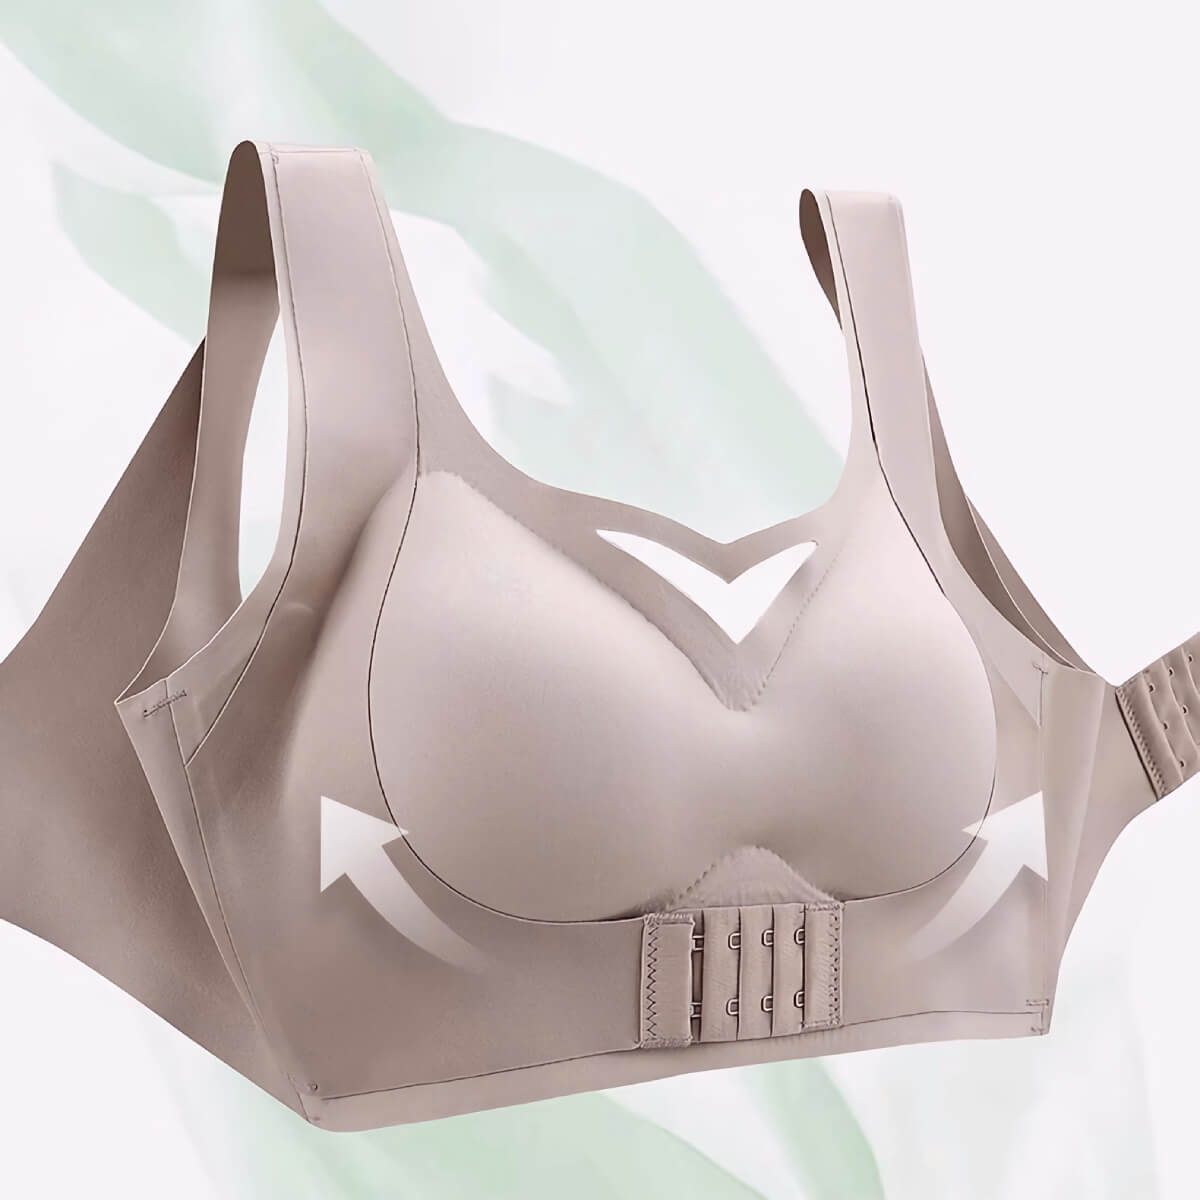 Strapless Bras for Women Front Buckle Lift Bra Minimizer Push Up